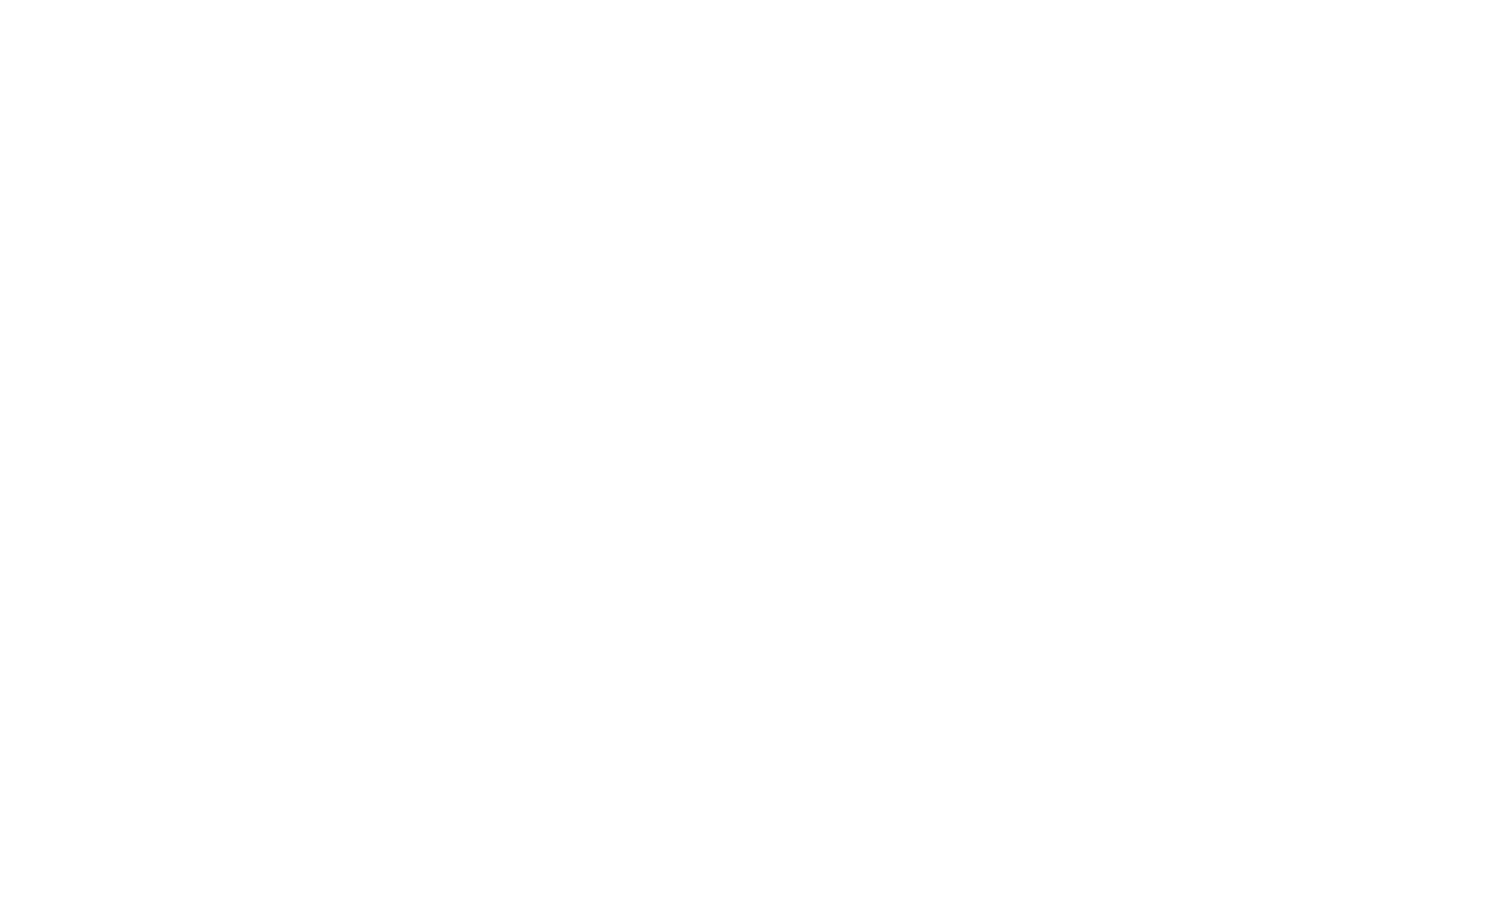 Heritage Group Real Estate